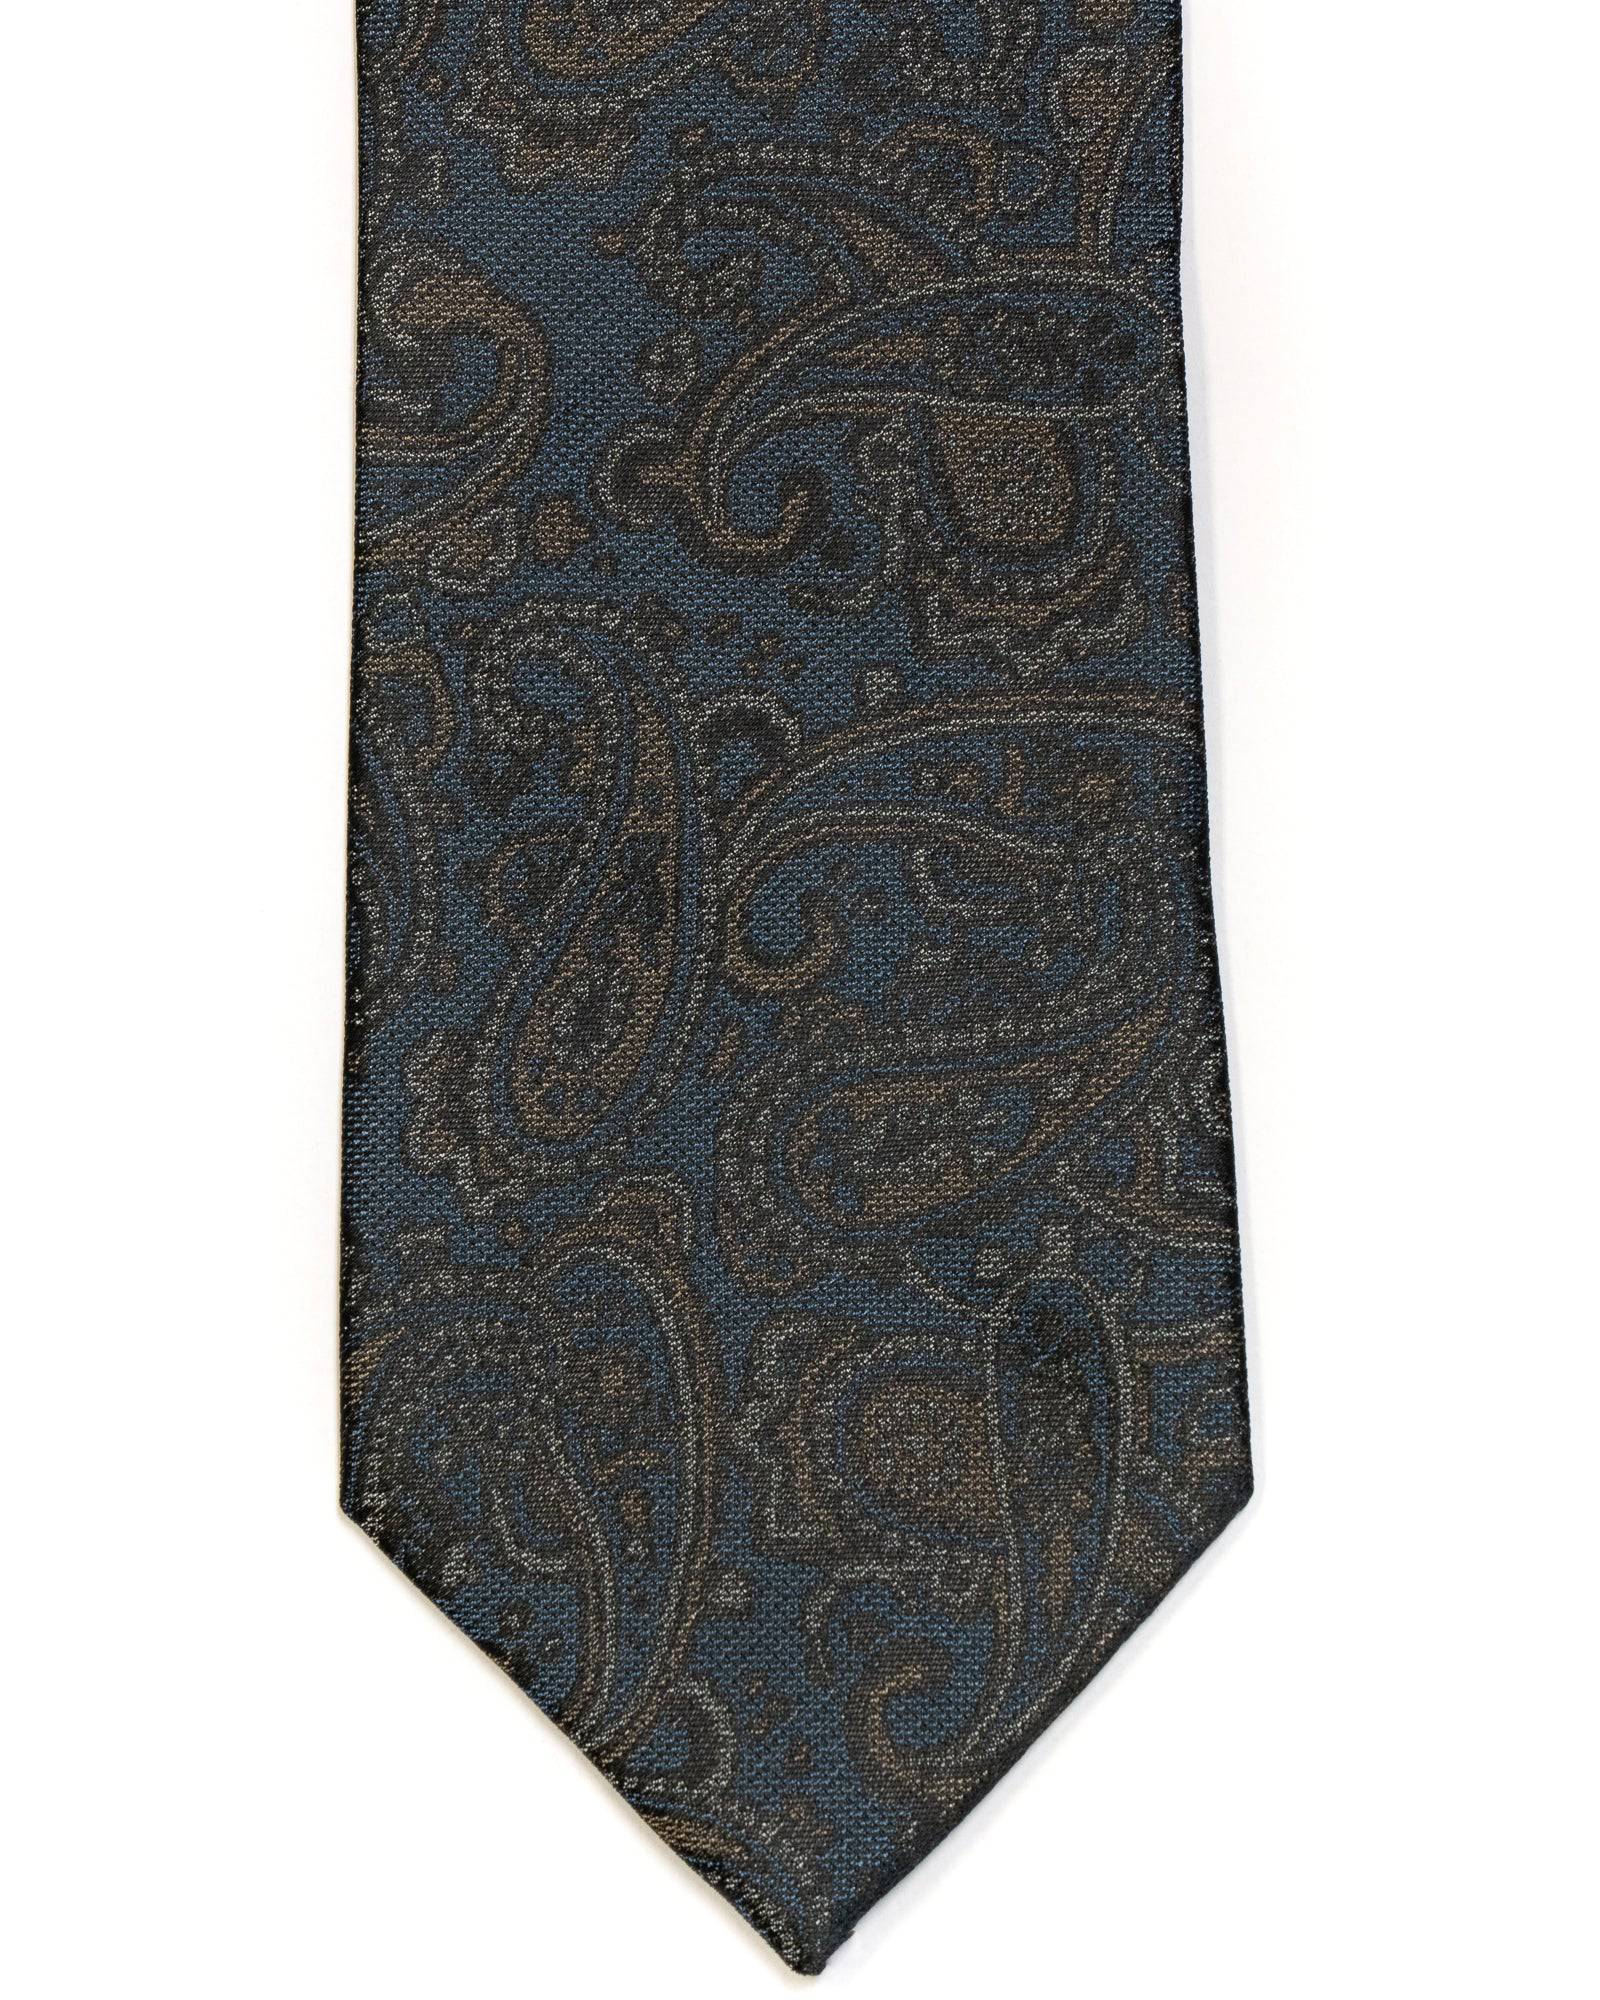 Silk Tie In Blue With Brown Paisley Design - Rainwater's Men's Clothing and Tuxedo Rental